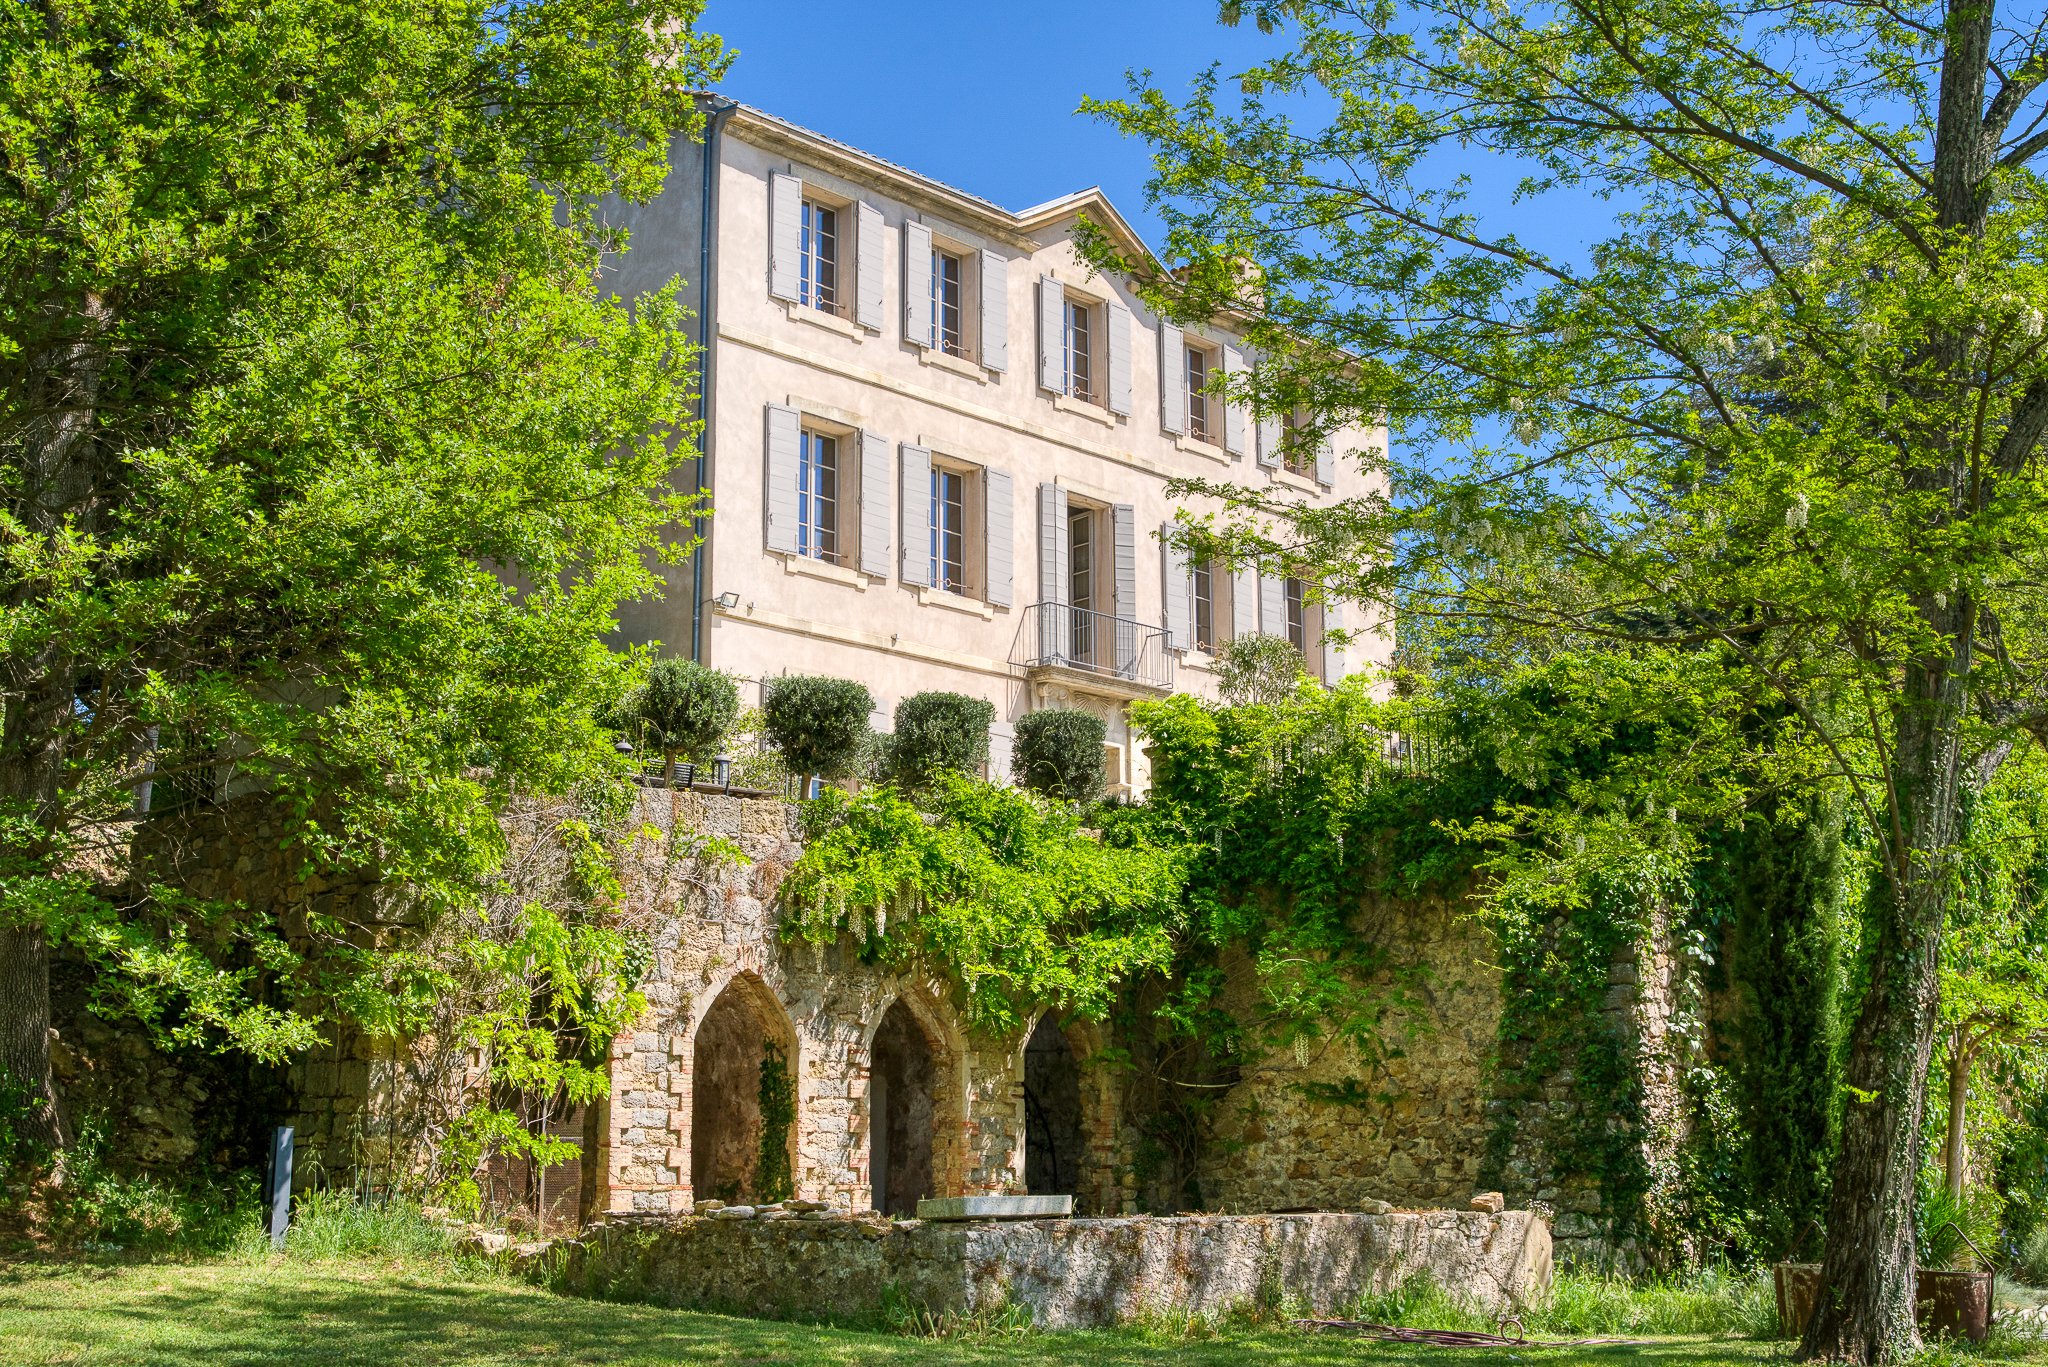 Francis York Luxury French Chateau and Vineyard in the Var, Provence 15.jpg